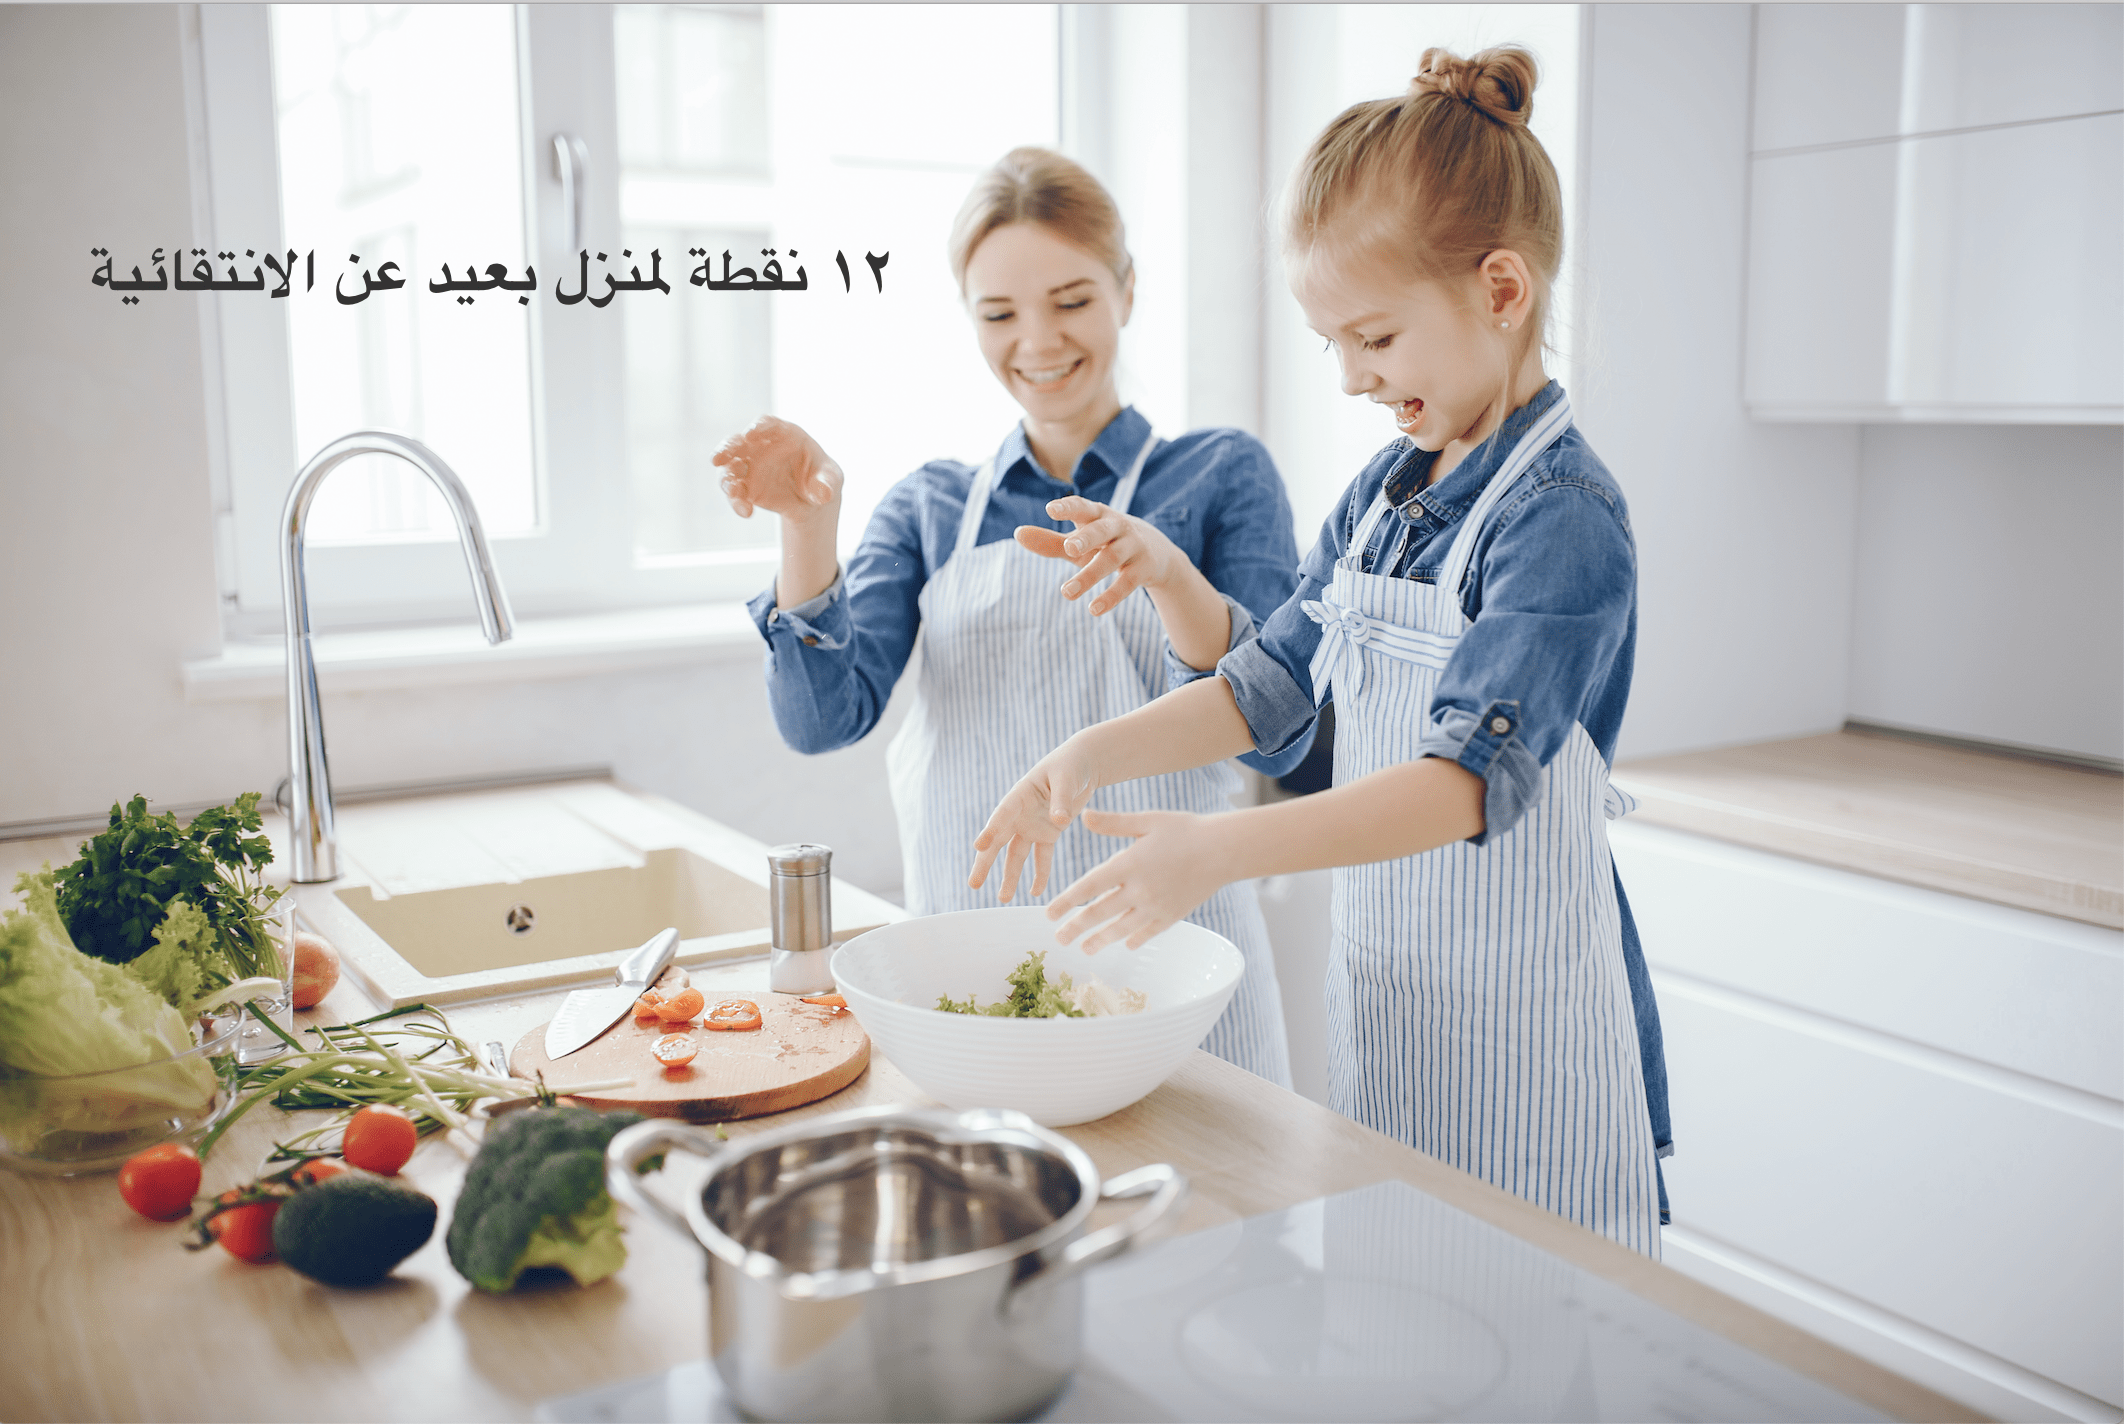 Ages 1 to 7 - Feed With Confidence Course - mirnaelsabbagh - Best Nutritionist in Dubai and Middle East - Mommy and health influencer in dubai and Middle East 